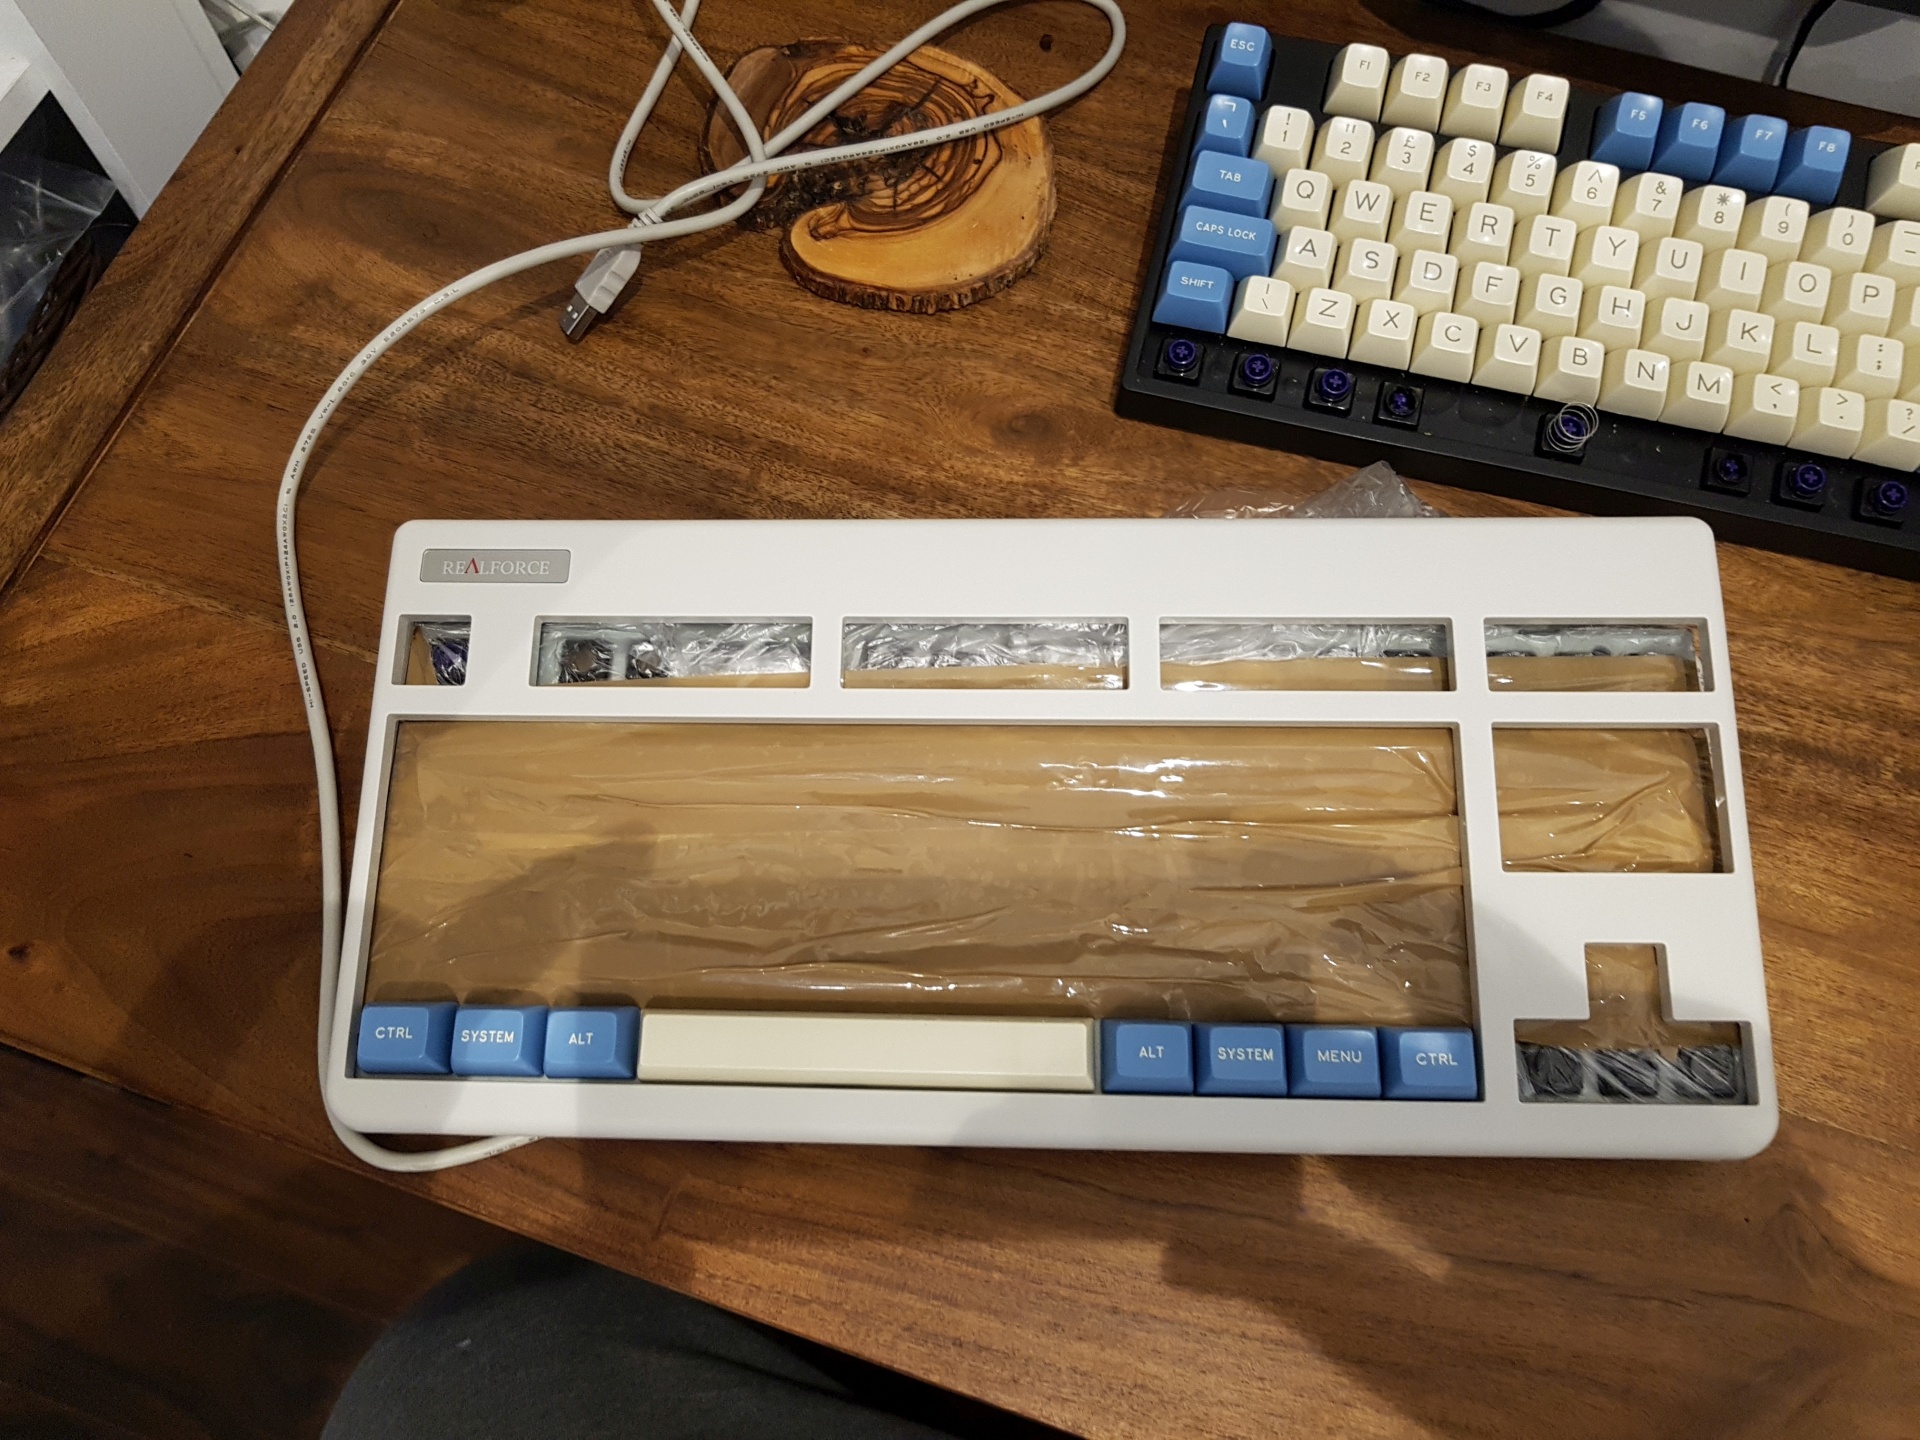 Phinix Realforce Mod - Topre to MX - with full standard bottom row!